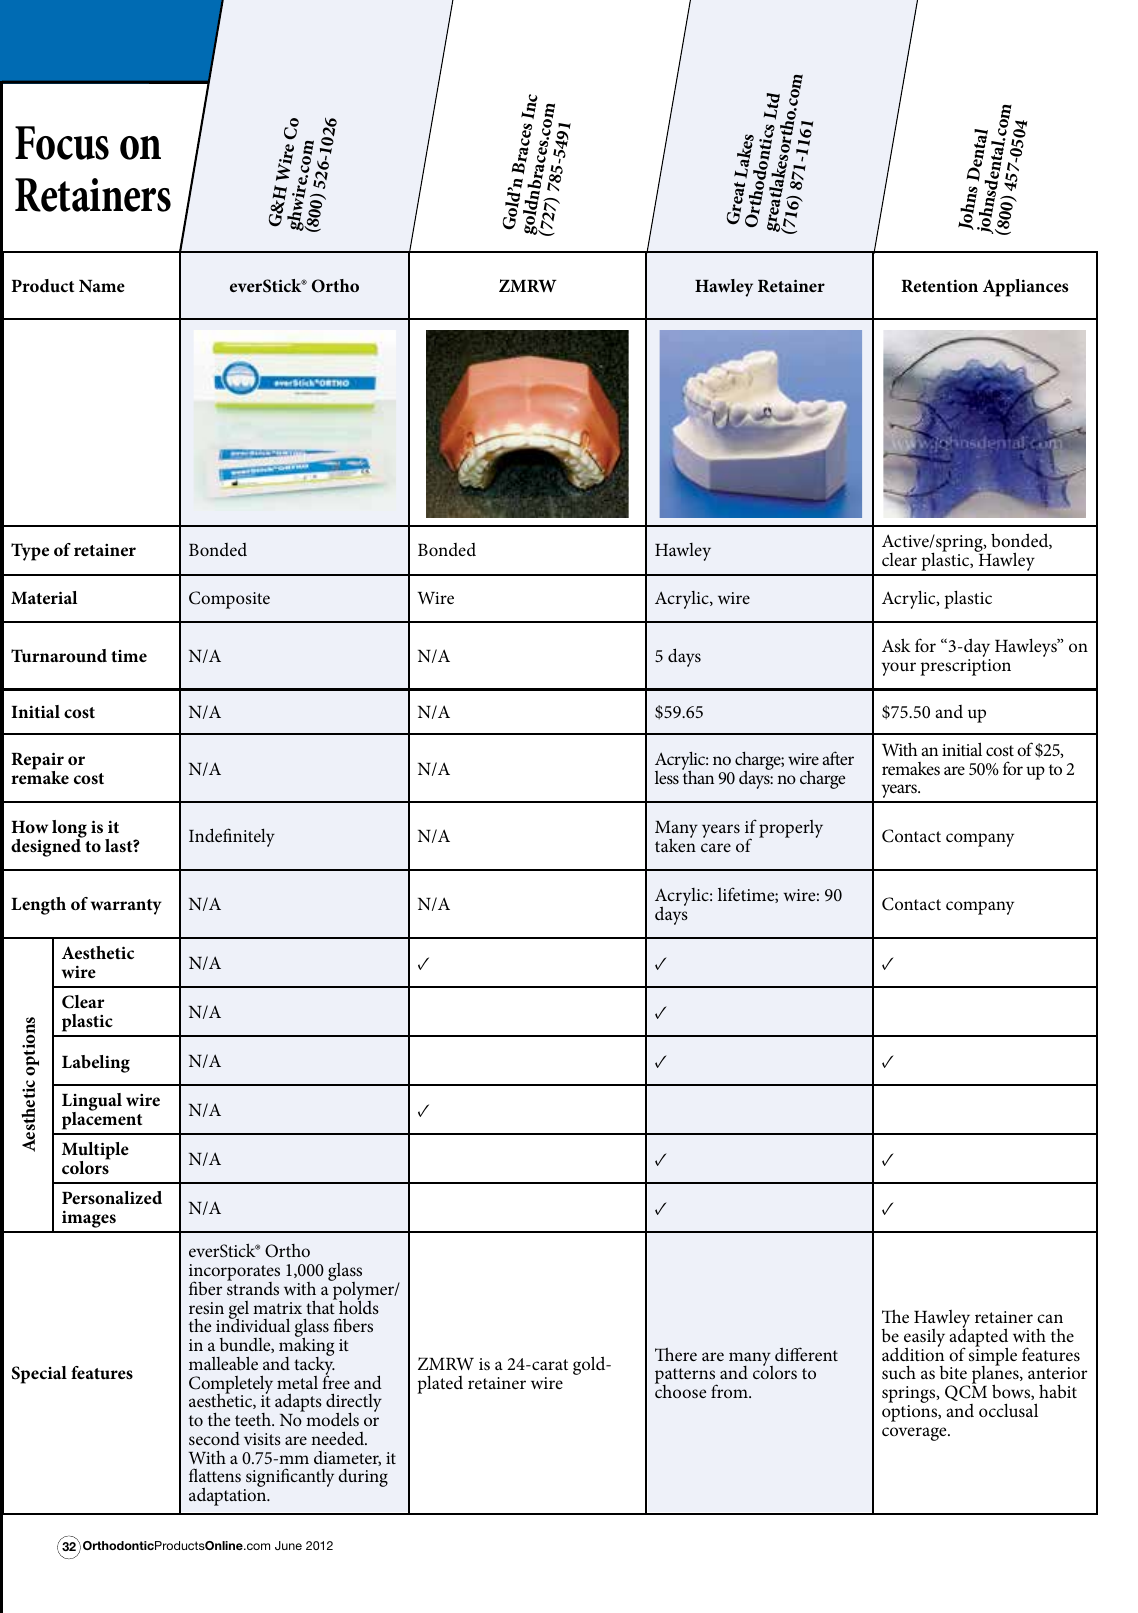 Page 3 of 6 - Images Editorial Orthodontic-products Pdf OP Focus Retainers June2012